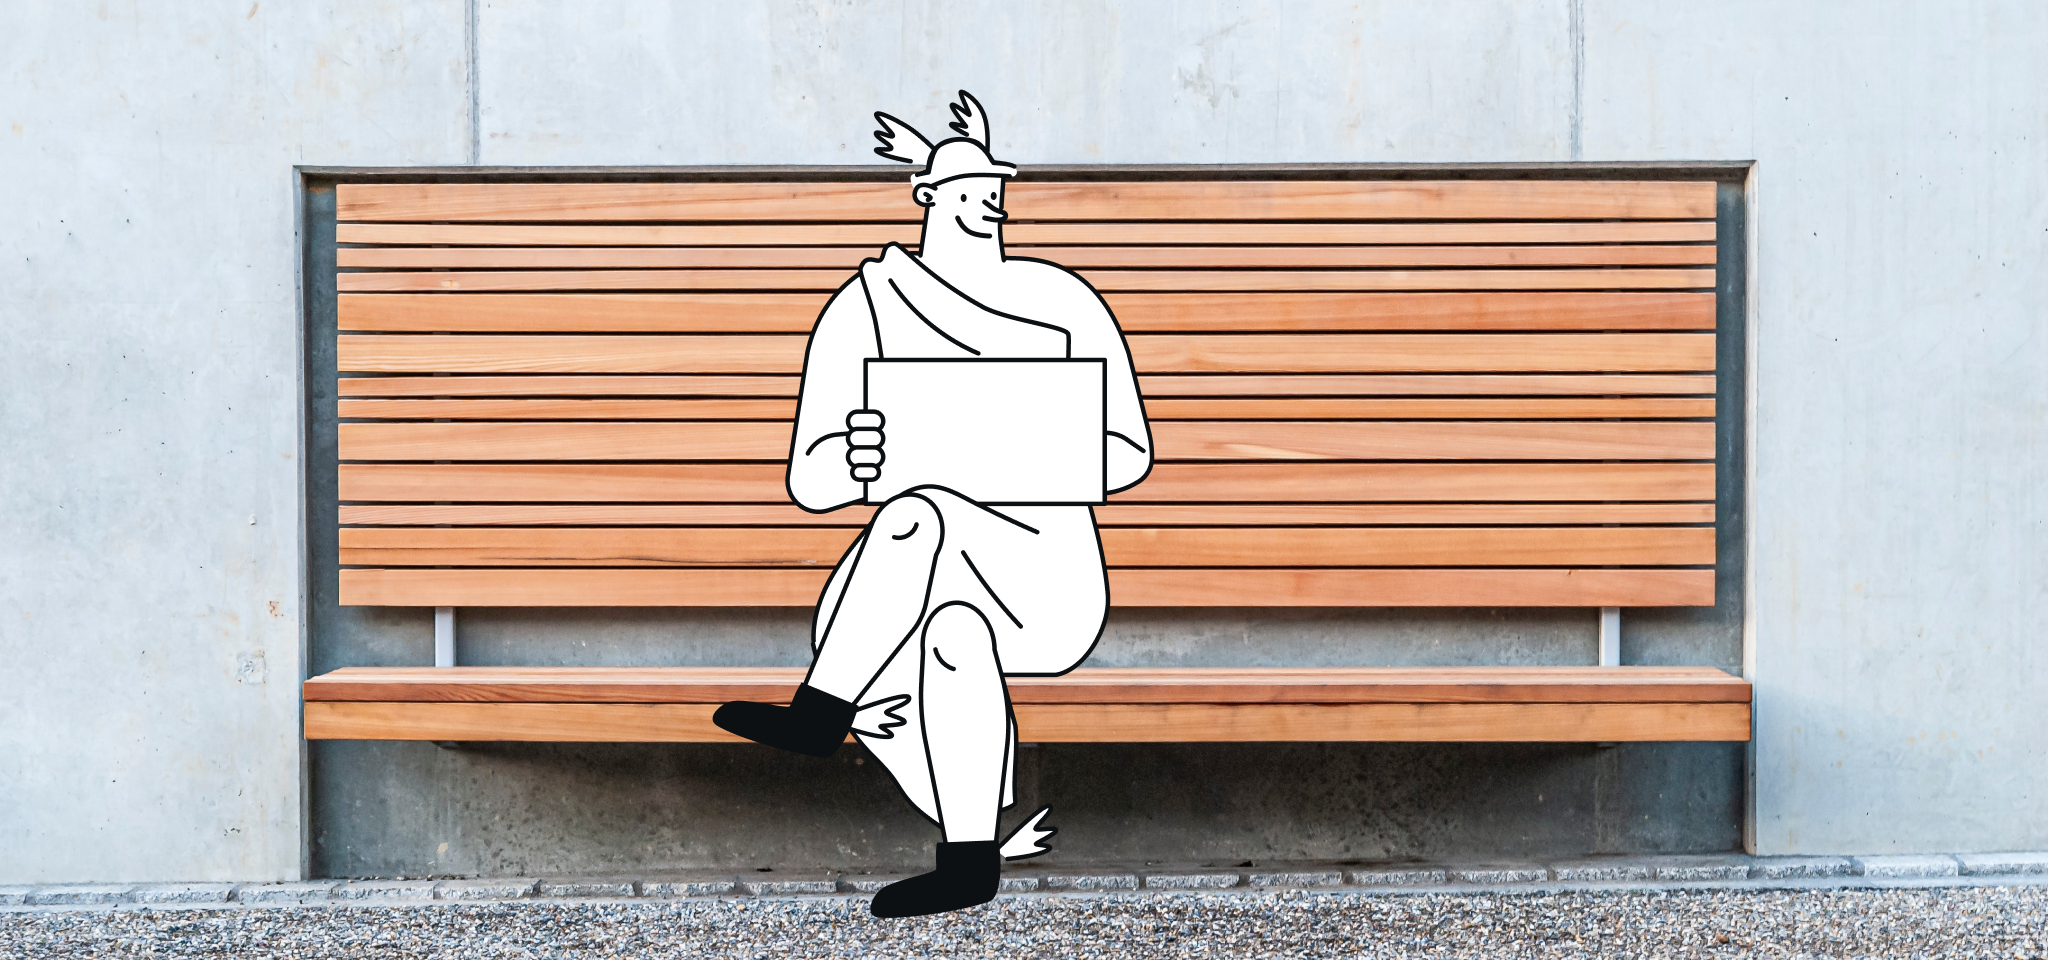 Hermes sitting on a bench with a laptop